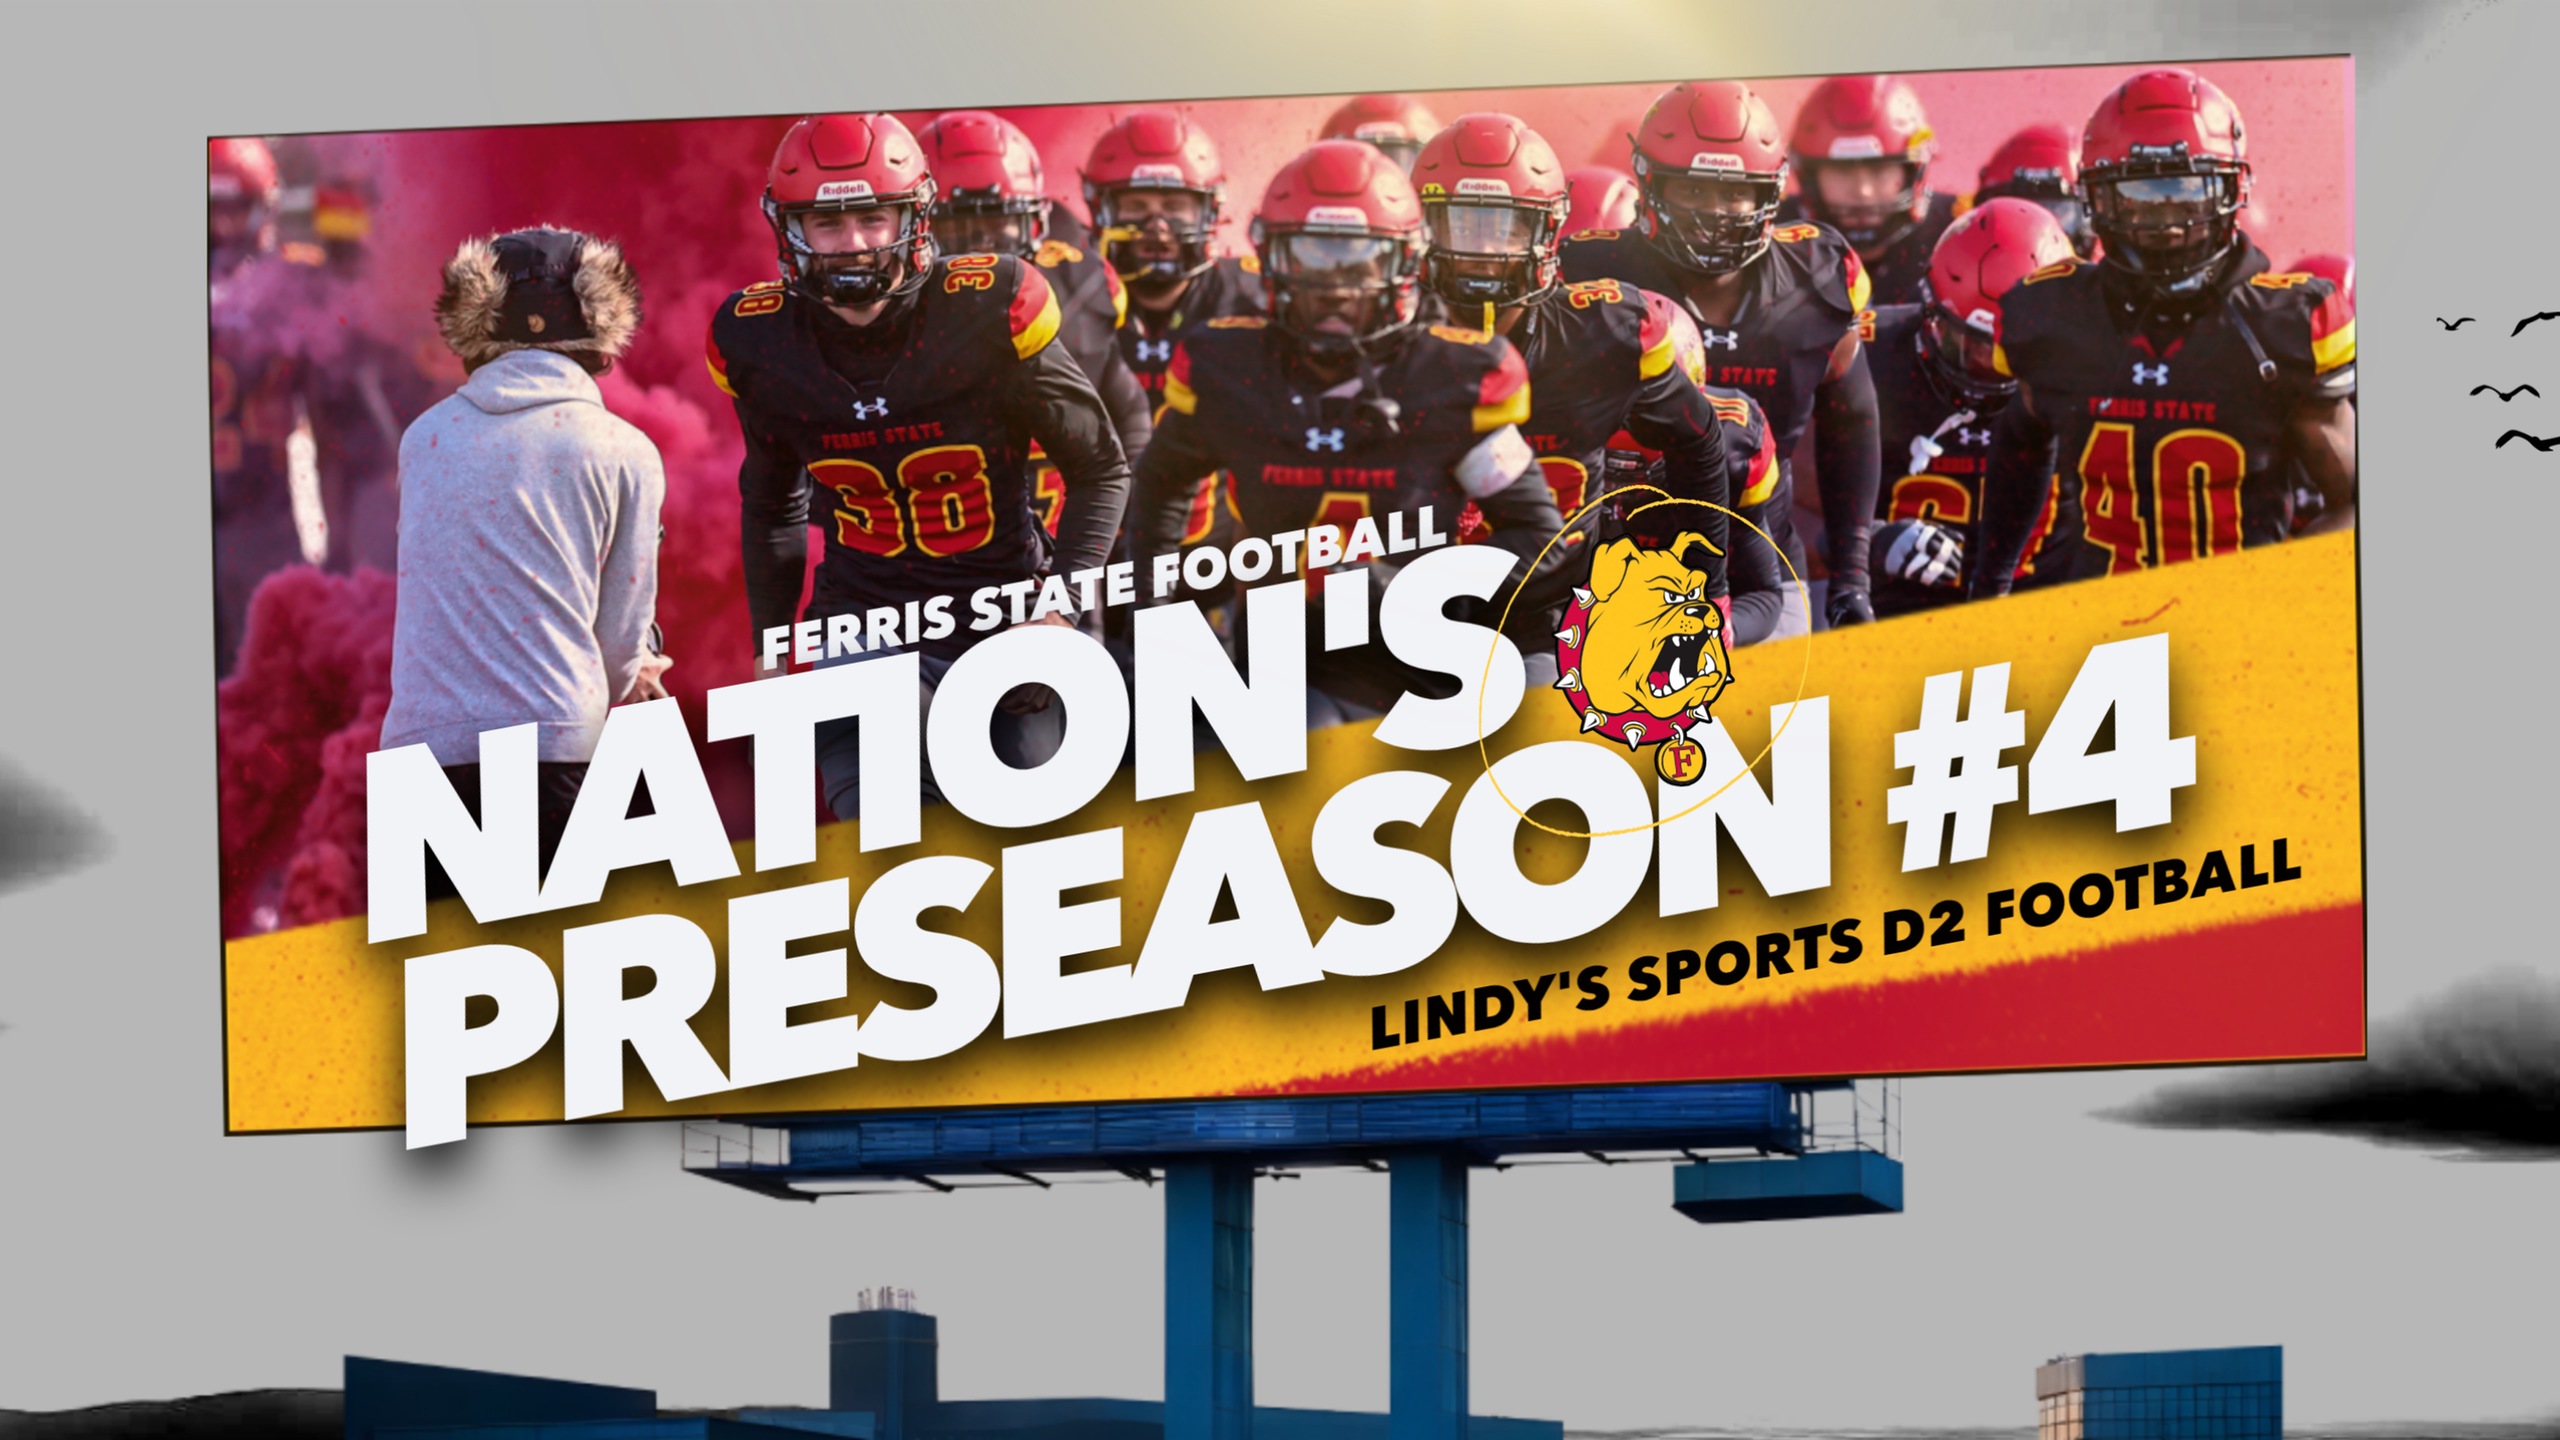 Ferris State Football Picked As Nation's #4 Preseason Team By Lindy's Sports